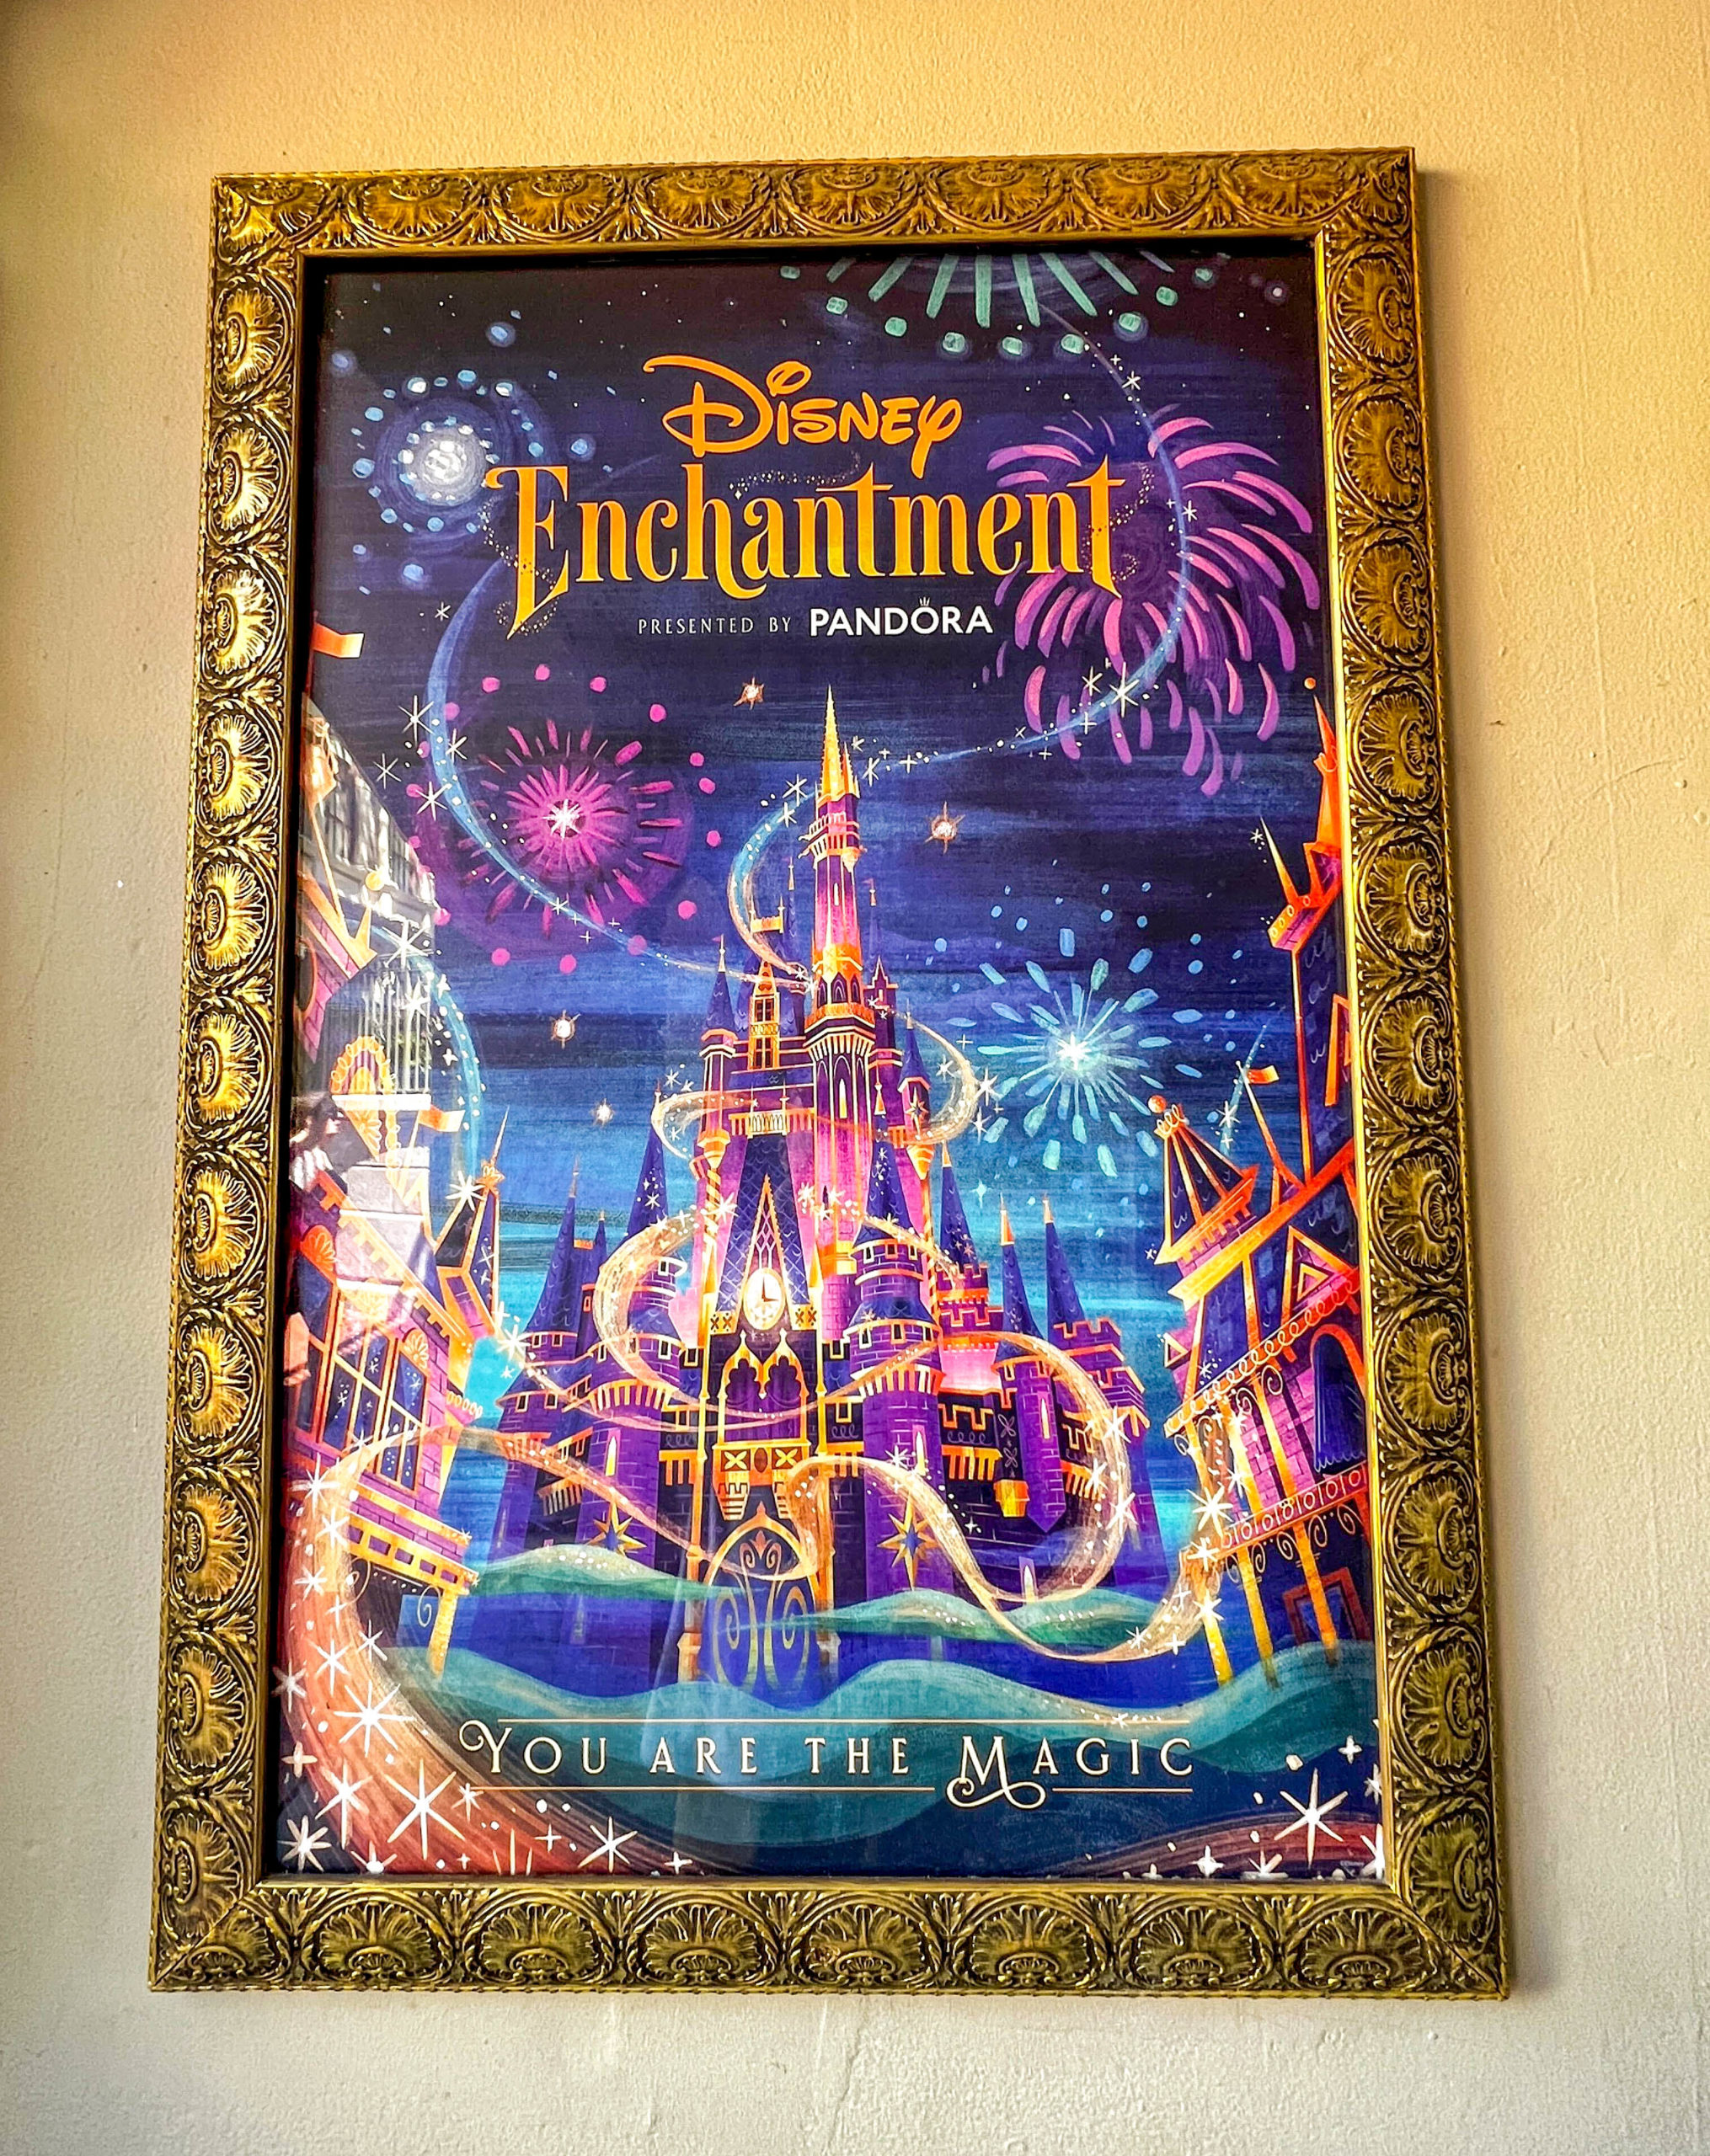 Enchantment poster on April 2nd